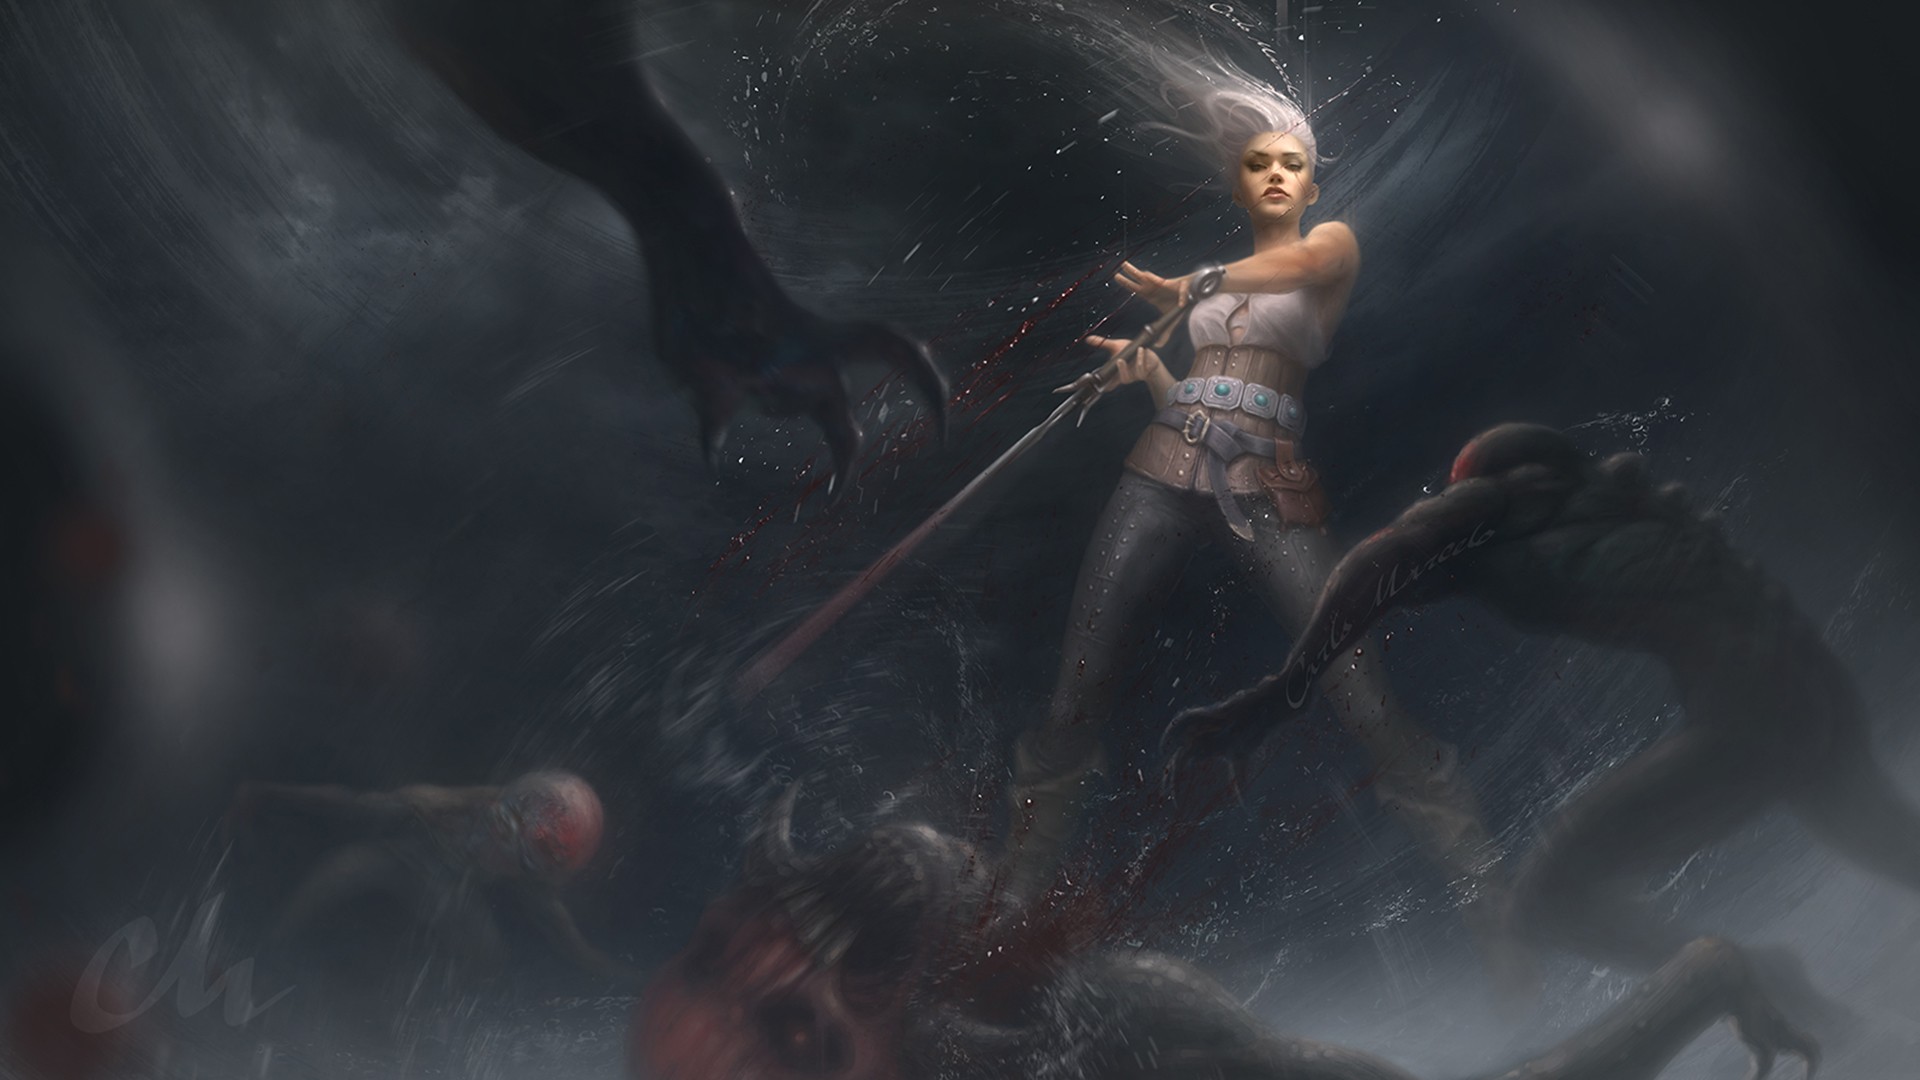 General 1920x1080 The Witcher 3: Wild Hunt video games Cirilla Fiona Elen Riannon The Witcher fantasy girl fan art PC gaming blood women with swords video game girls video game characters sword low-angle